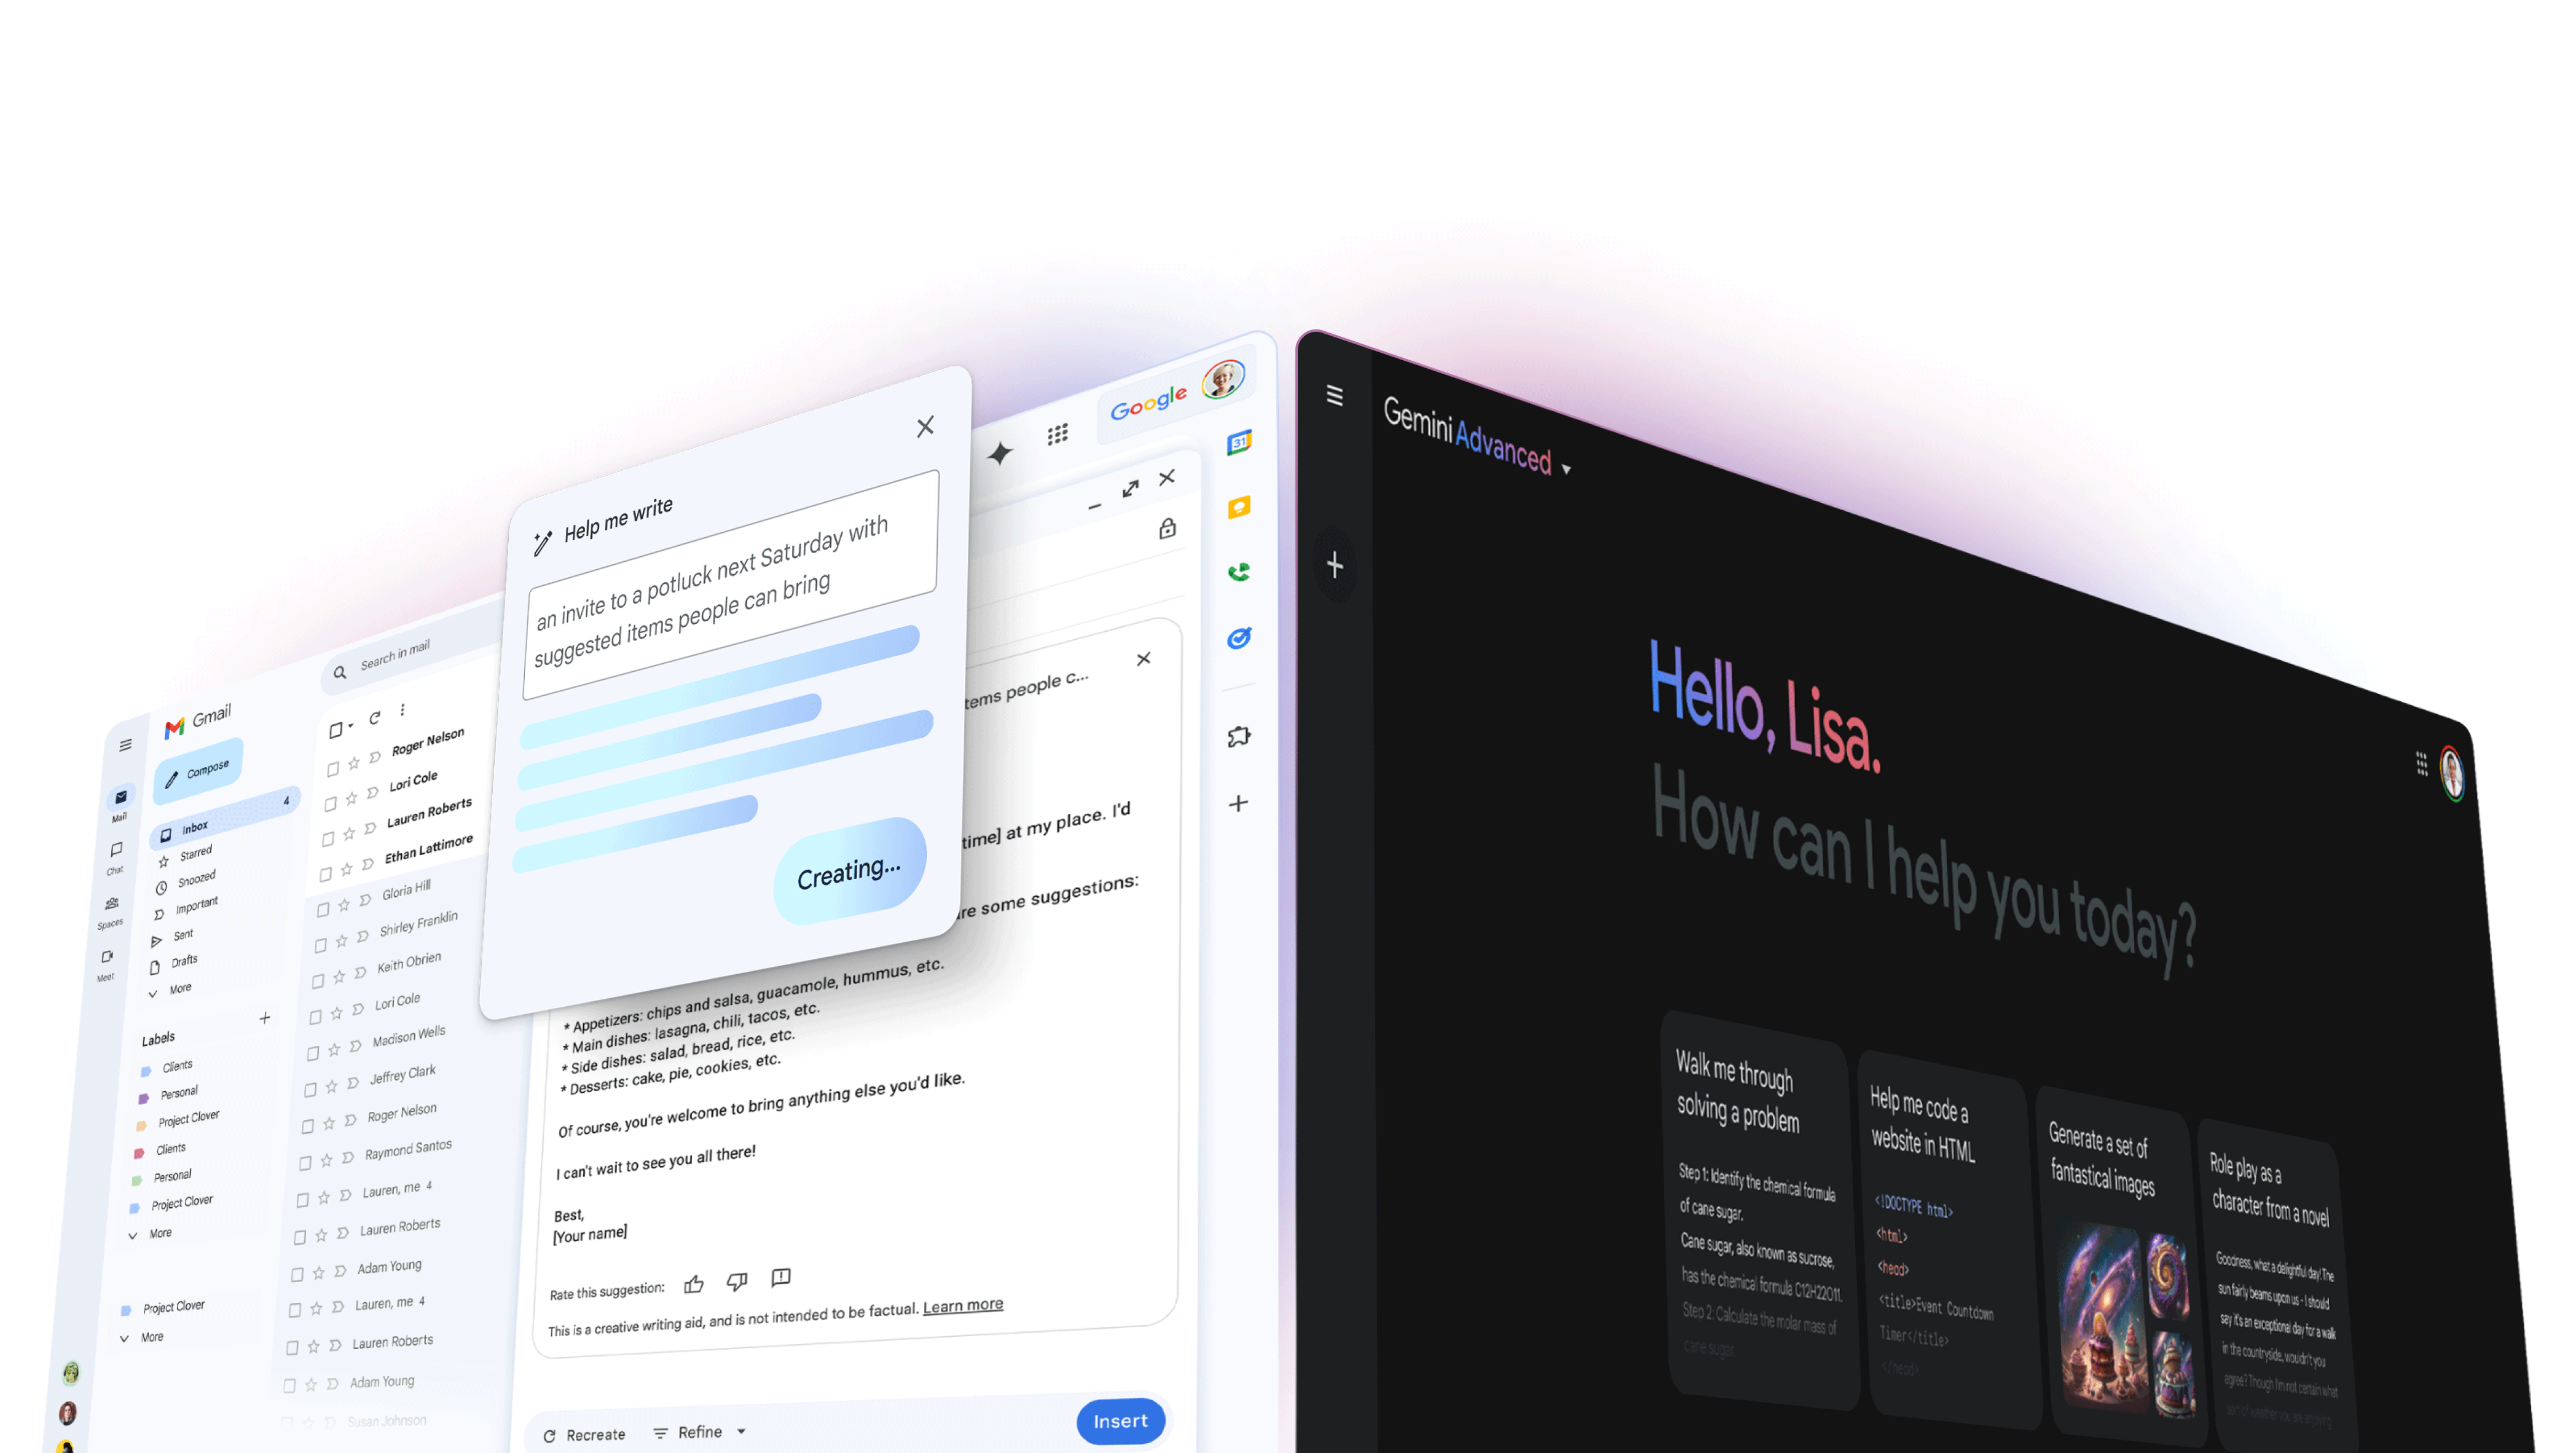 
                         
                           Two screens showing Gmail and Gemini Advanced.
                         
                       